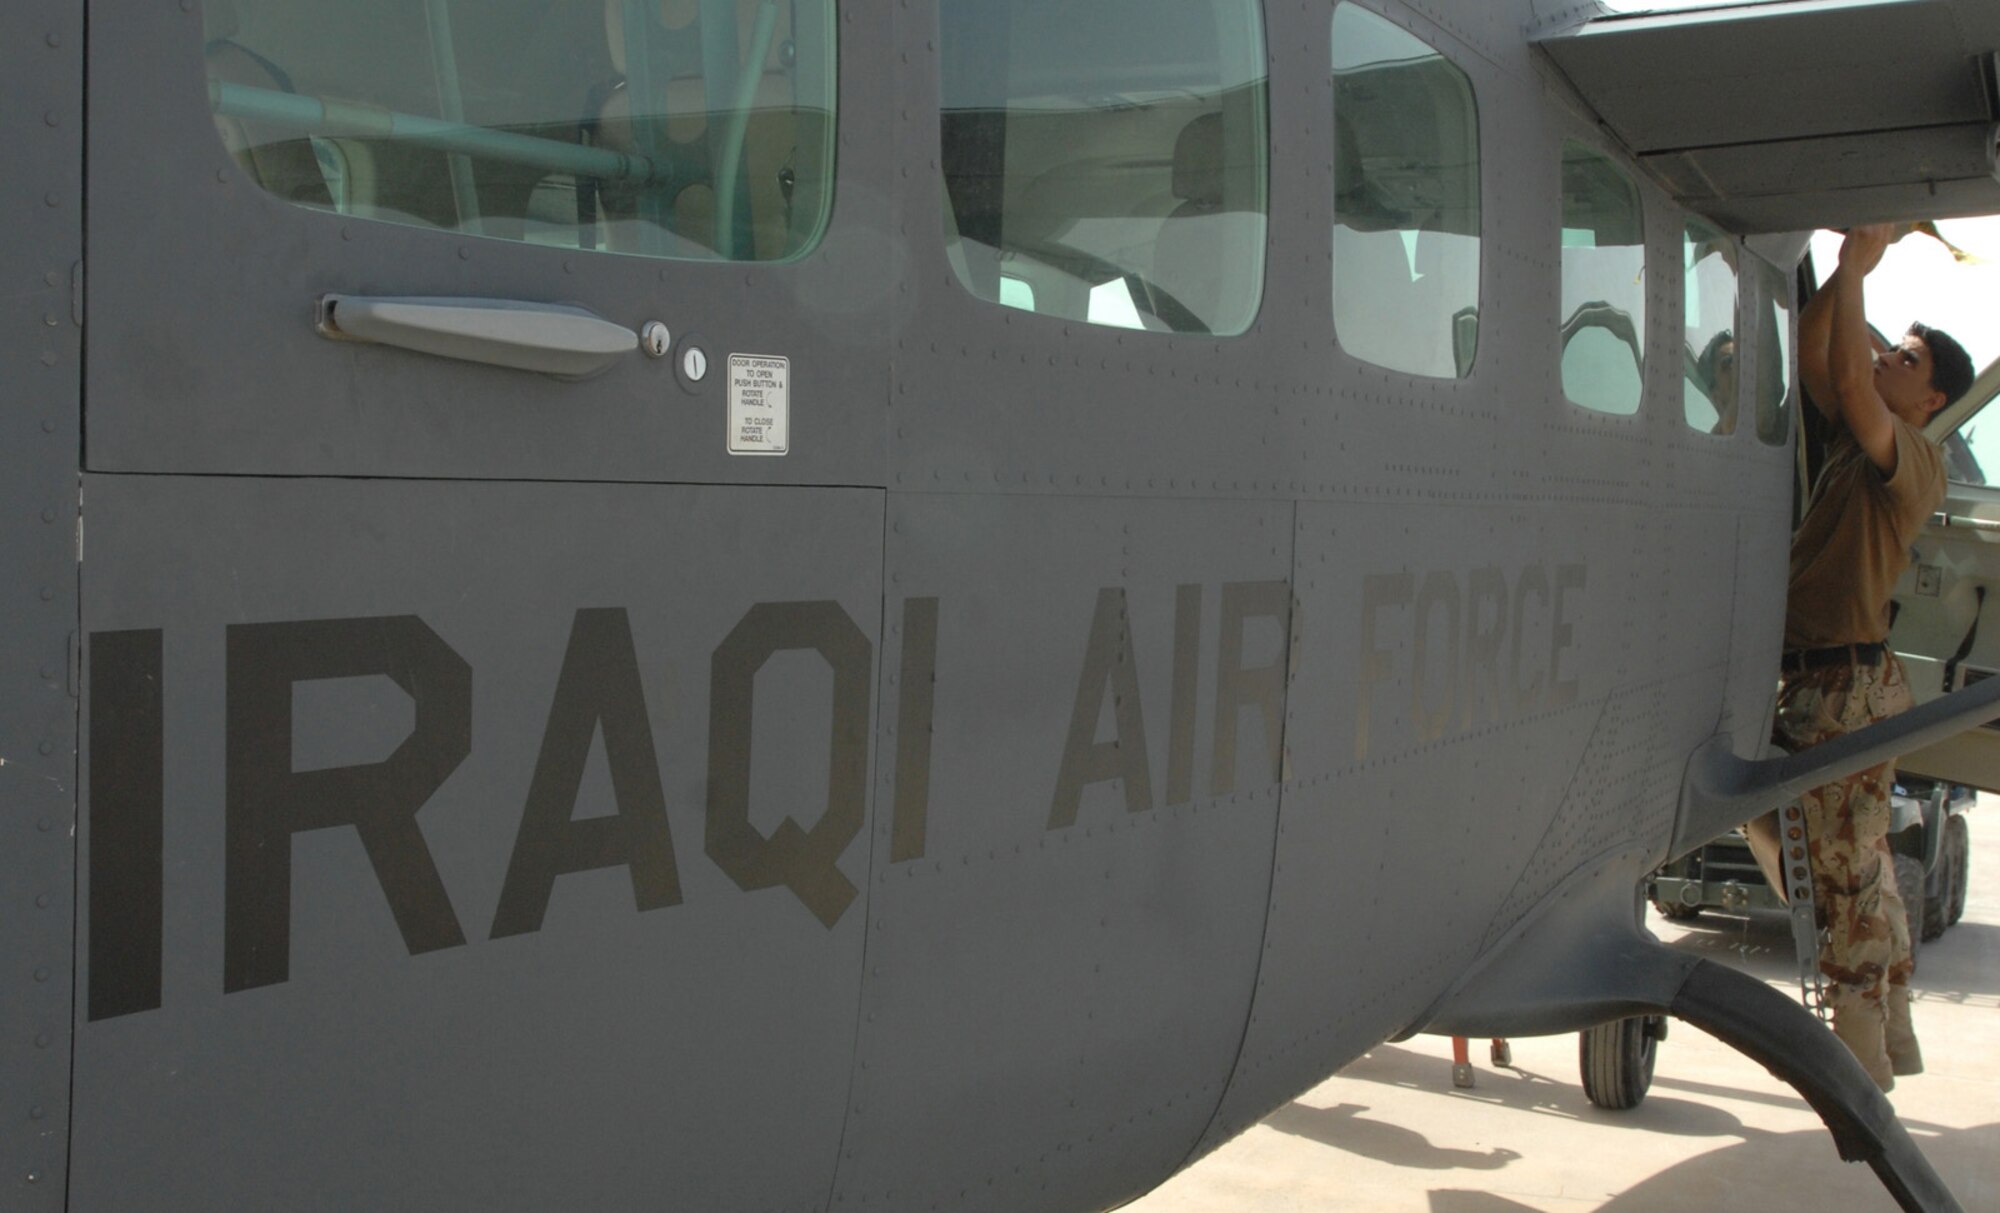 KIRKUK REGIONAL AIR BASE, Iraq - An Iraqi Airmen performs maintenance on a 3rd Squadron Cessna 208 recently here. While Iraqi air force pilots continue flying sorties to aid stability in their nation, Iraqi maintainers on the ground here have recently achieved important benchmarks to keep their fleet in the air. Airmen with the Iraqi air forces’ 3rd Squadron here recently took over a wide variety of maintenance duties on the unit’s Cessna 208 Caravan Intelligence, Surveillance and Reconnaissance fleet – a task formerly performed by U.S. contractors. (U.S. Air Force photo by Senior Airman Eric Schloeffel)